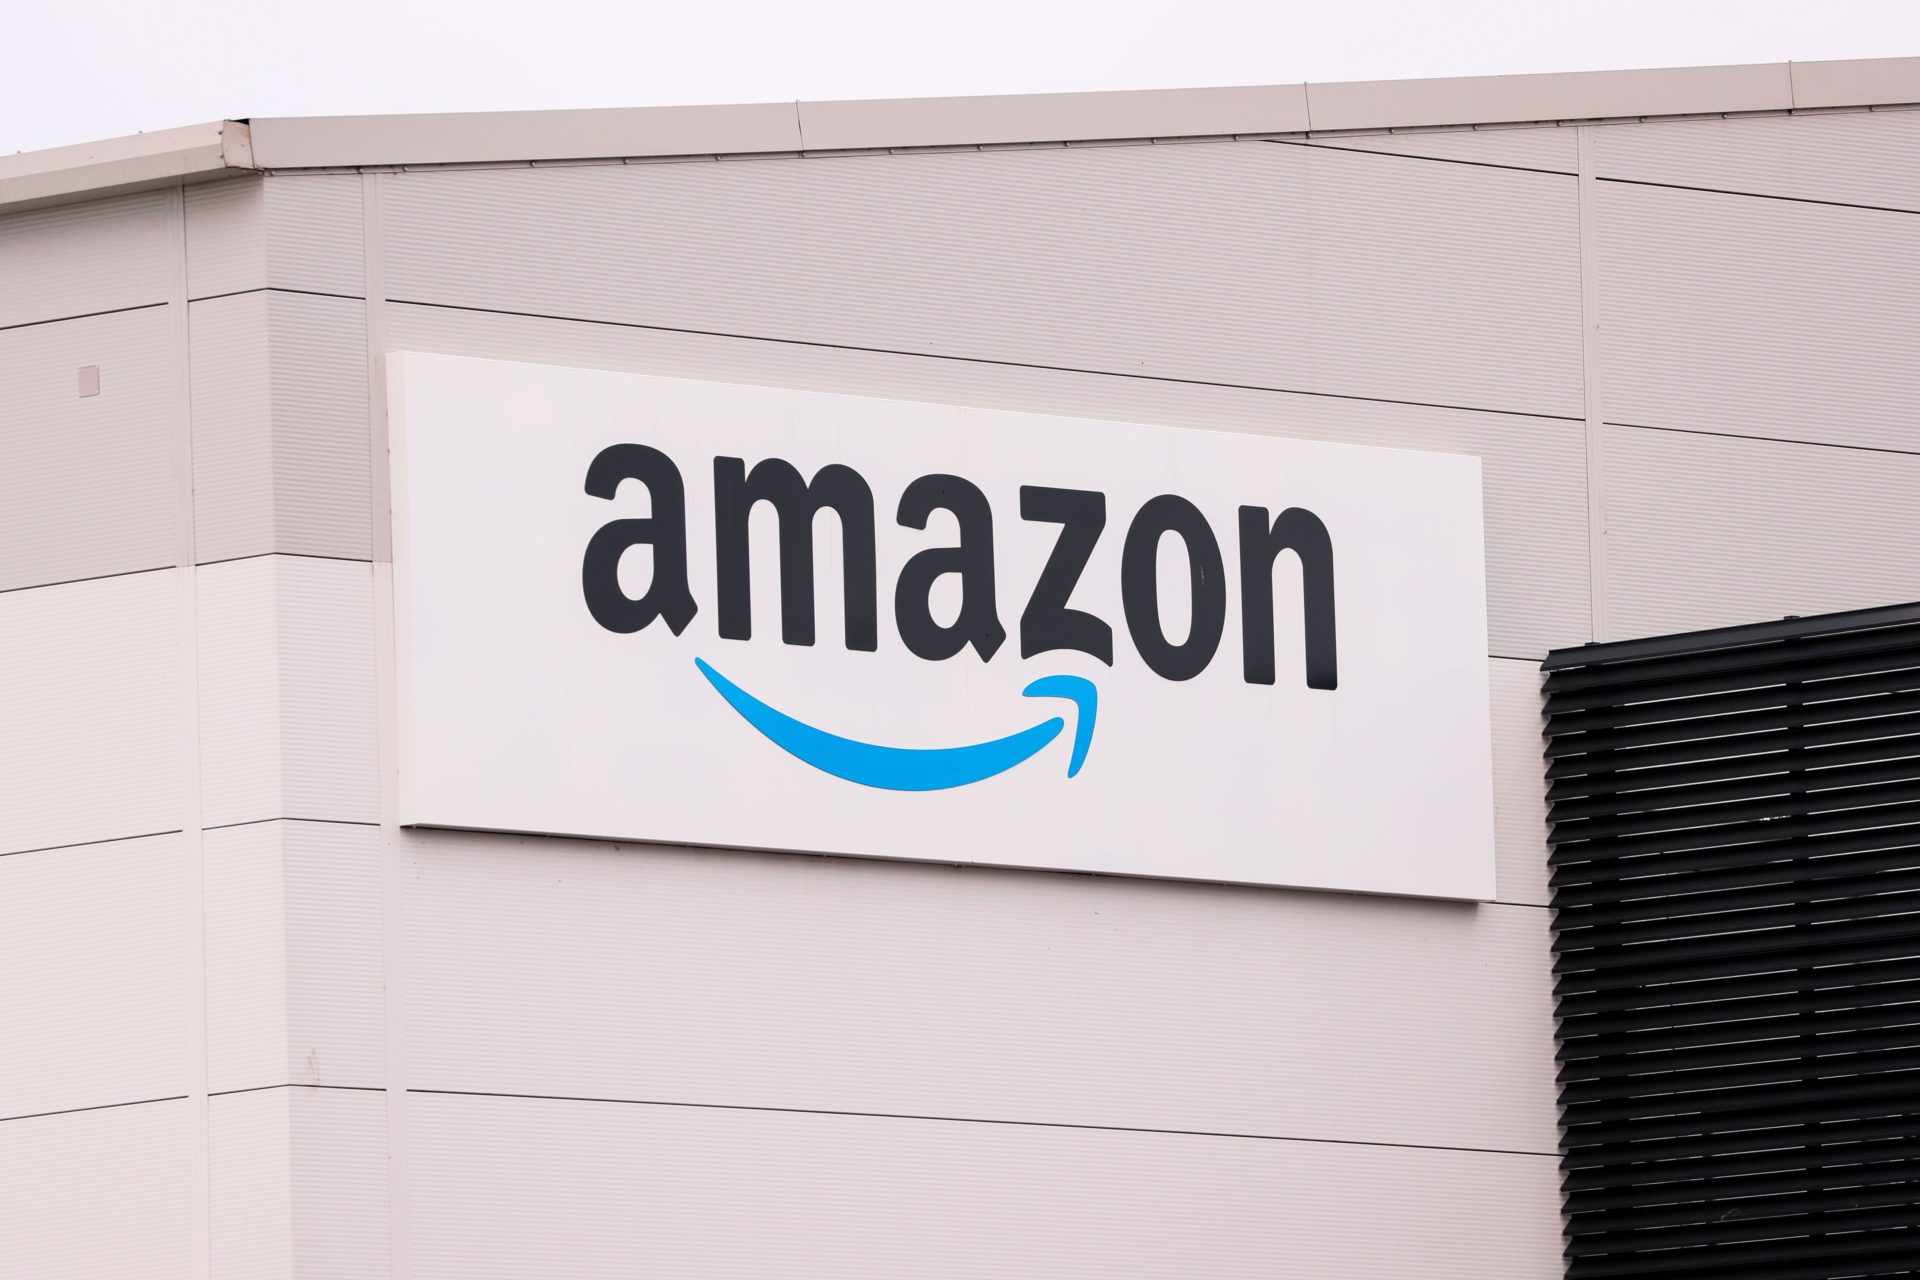 An Amazon logo and signage at a delivery hub in Belfast, Northern Ireland.